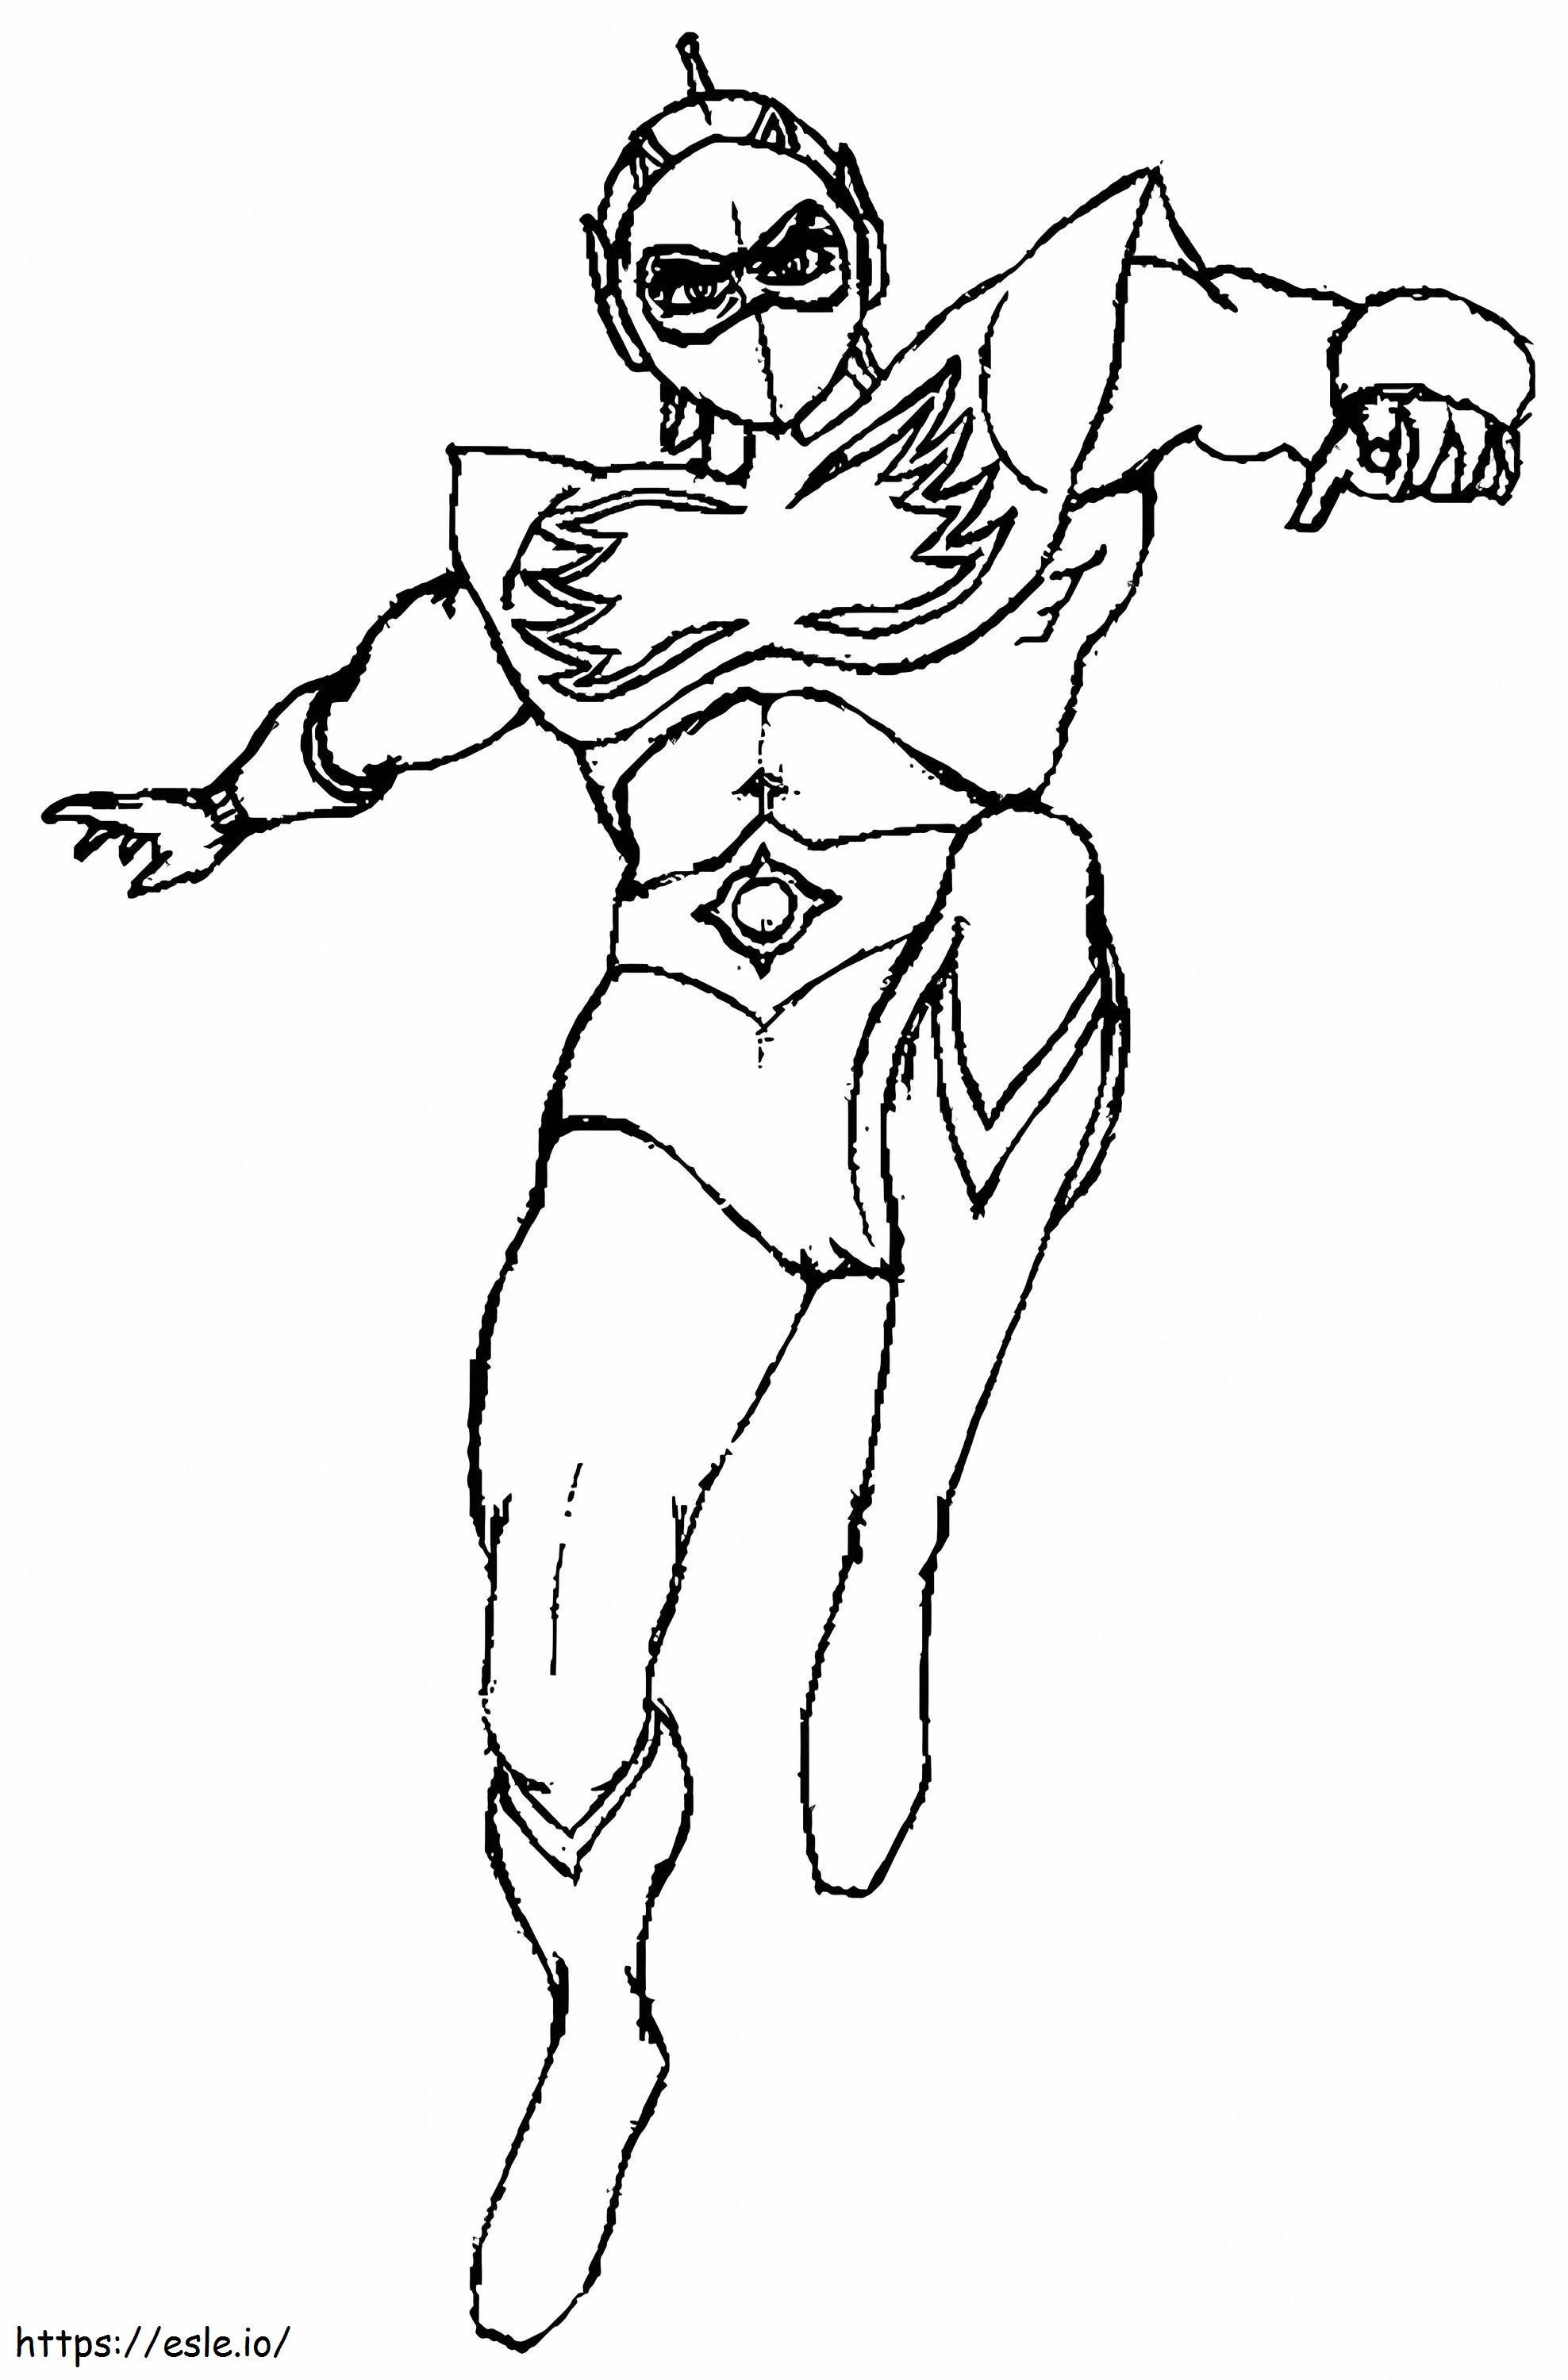 Goldorak Character coloring page